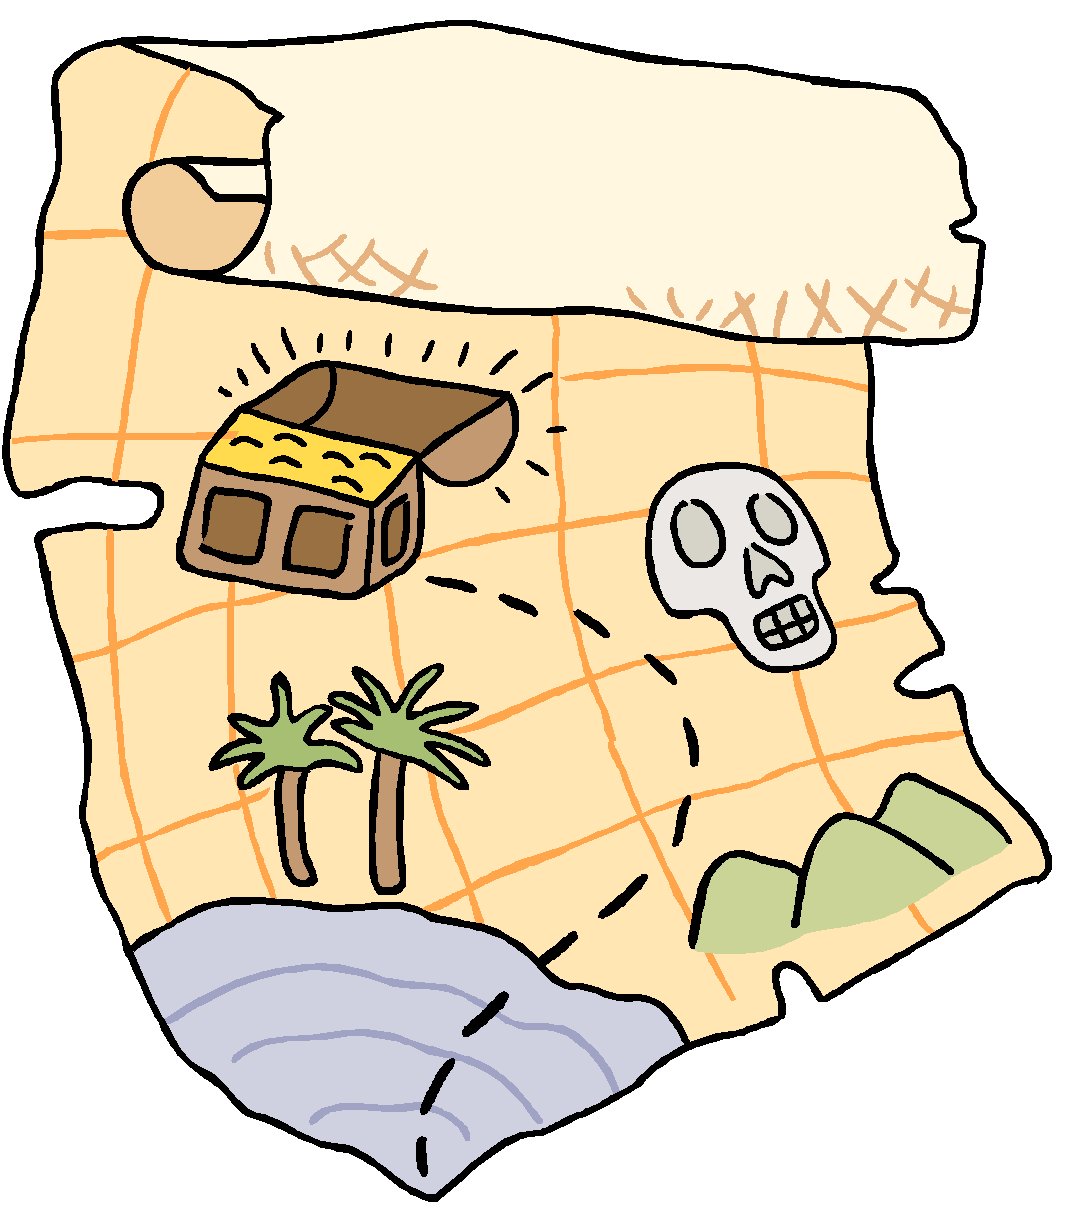 pirate map clipart - photo #20